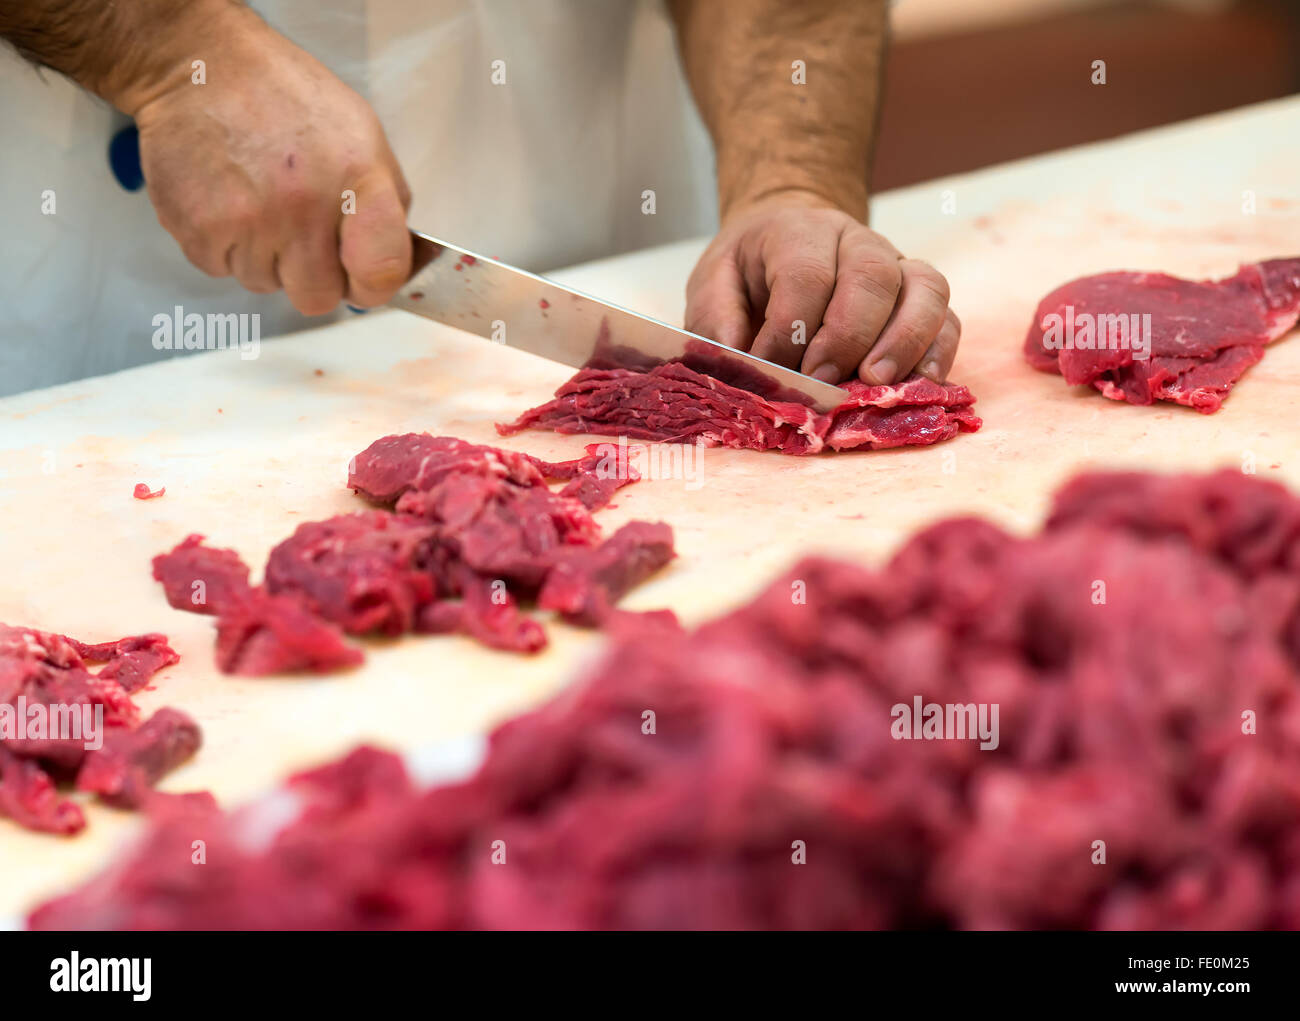 Close up of hands holding butcher knife and cuts of raw red meat on long cutting board in food processing facility Stock Photo